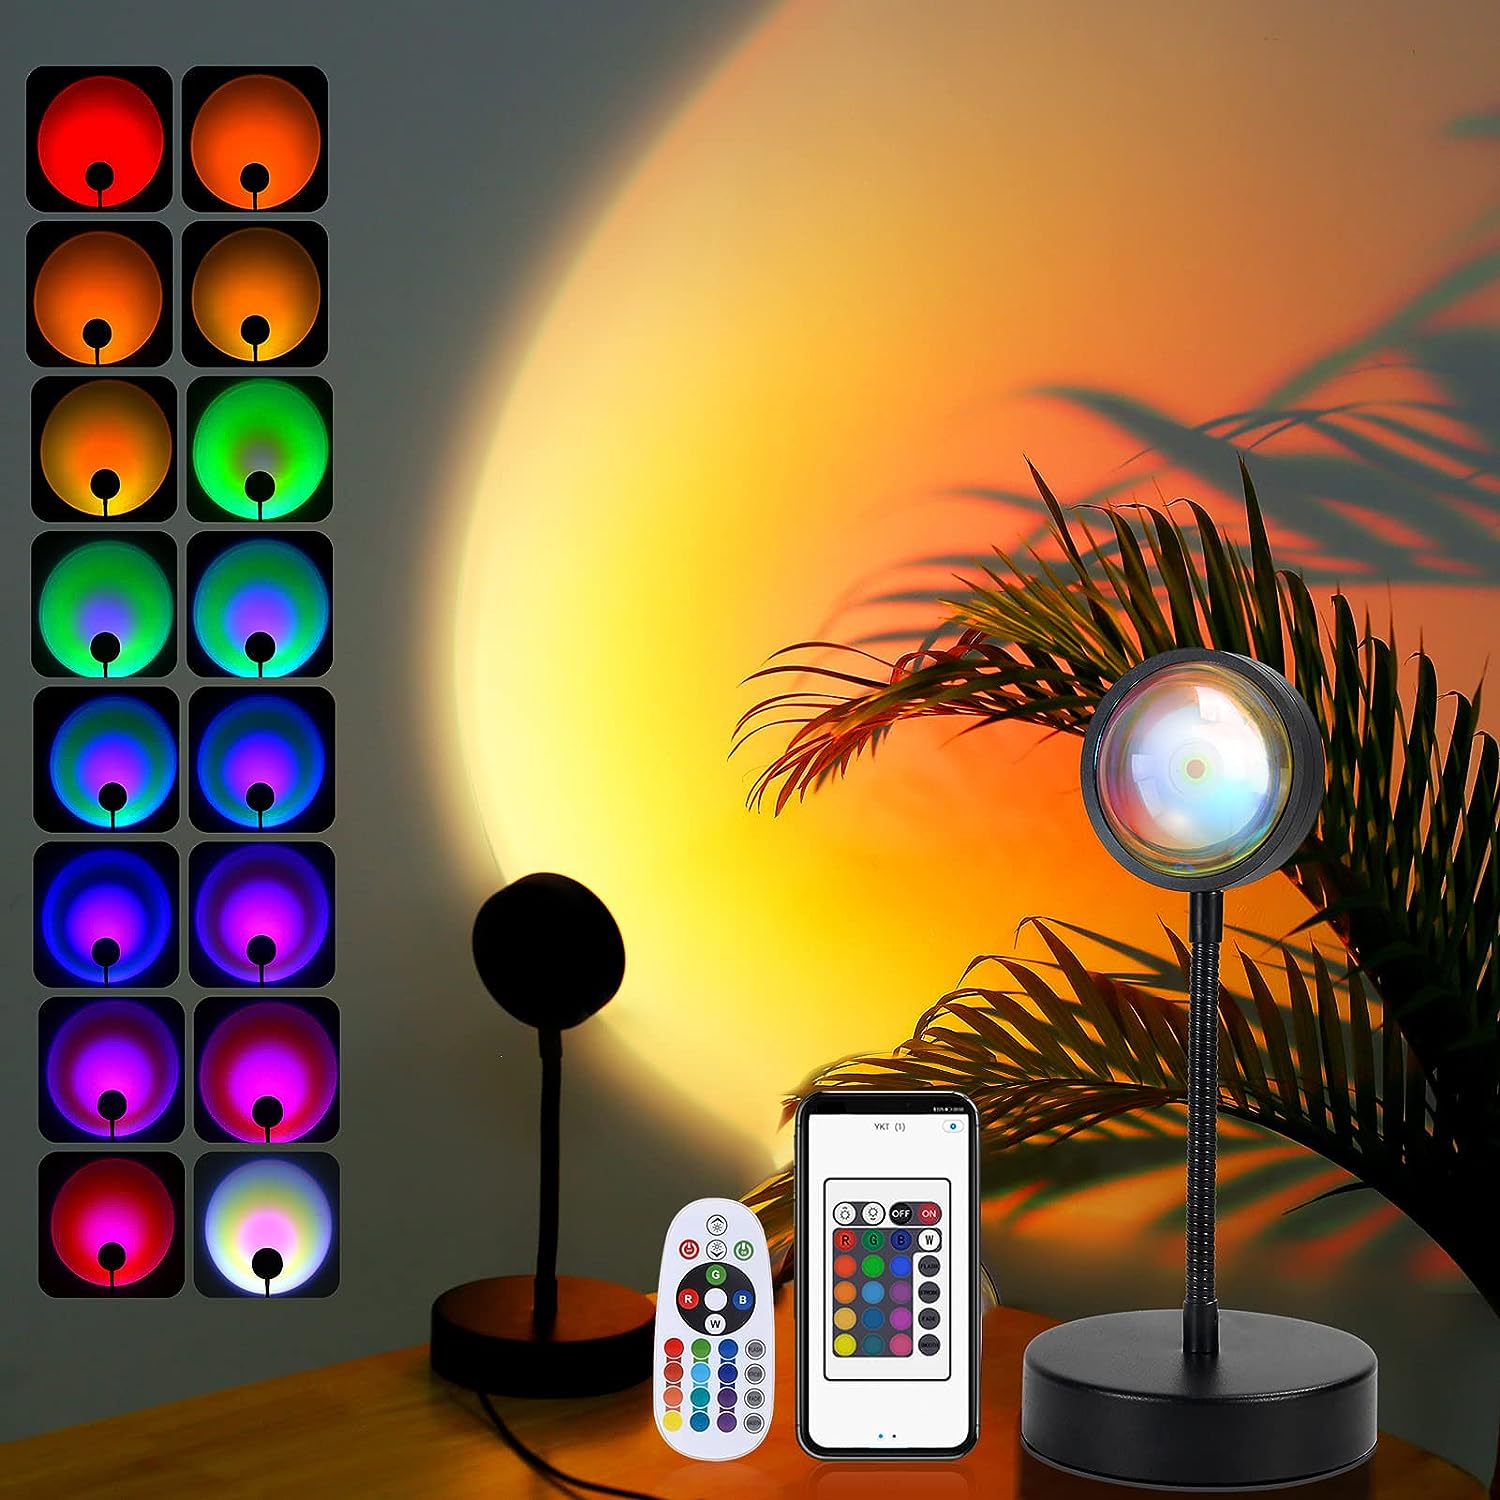 jimei-sunset-lamp-projector-led-lights-review